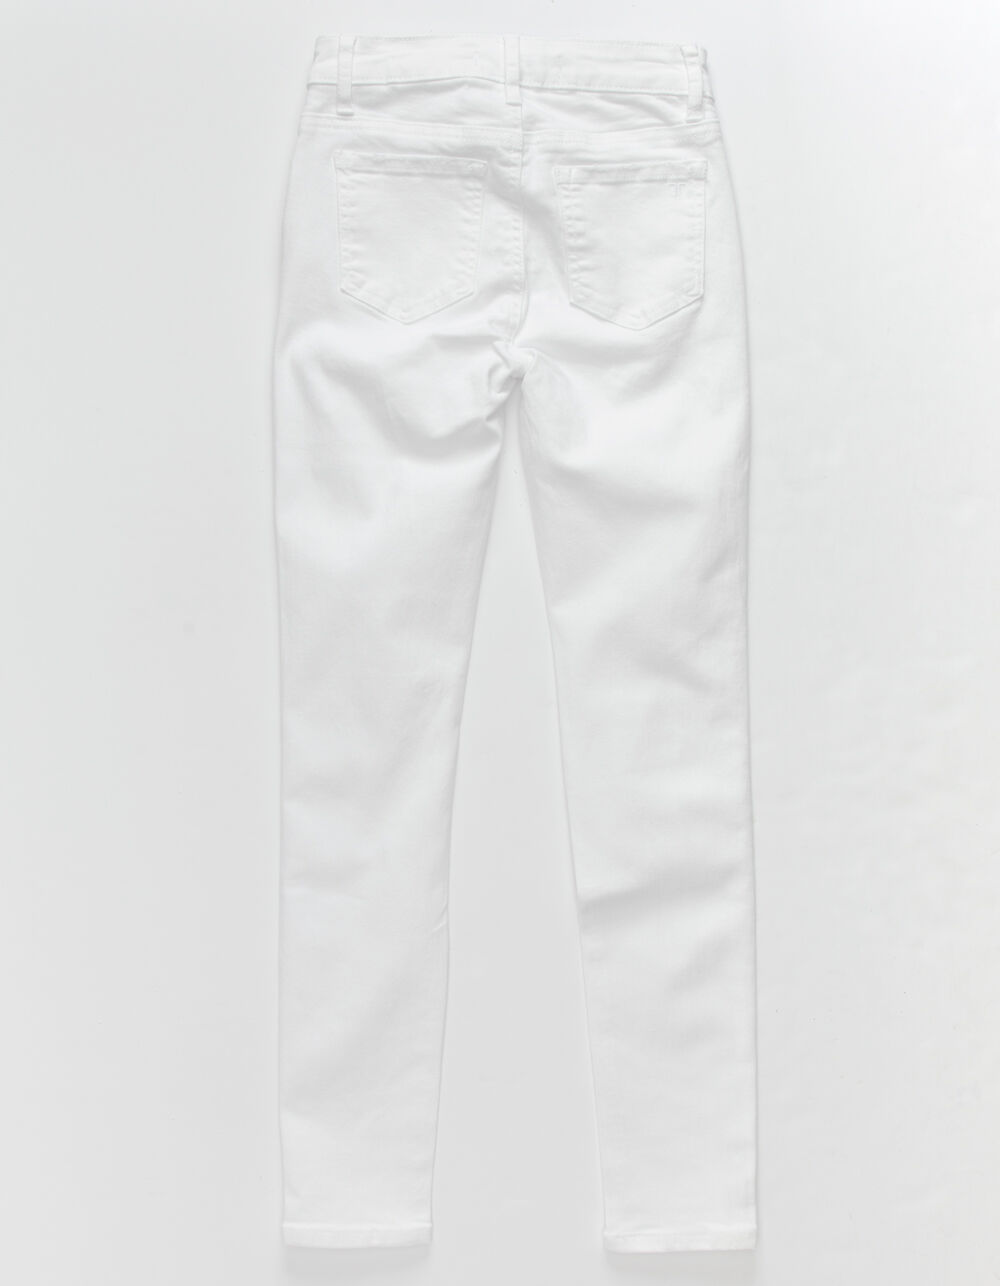 TRACTR High Rise Destructed Girls Ankle Skinny Jeans - WHITE | Tillys